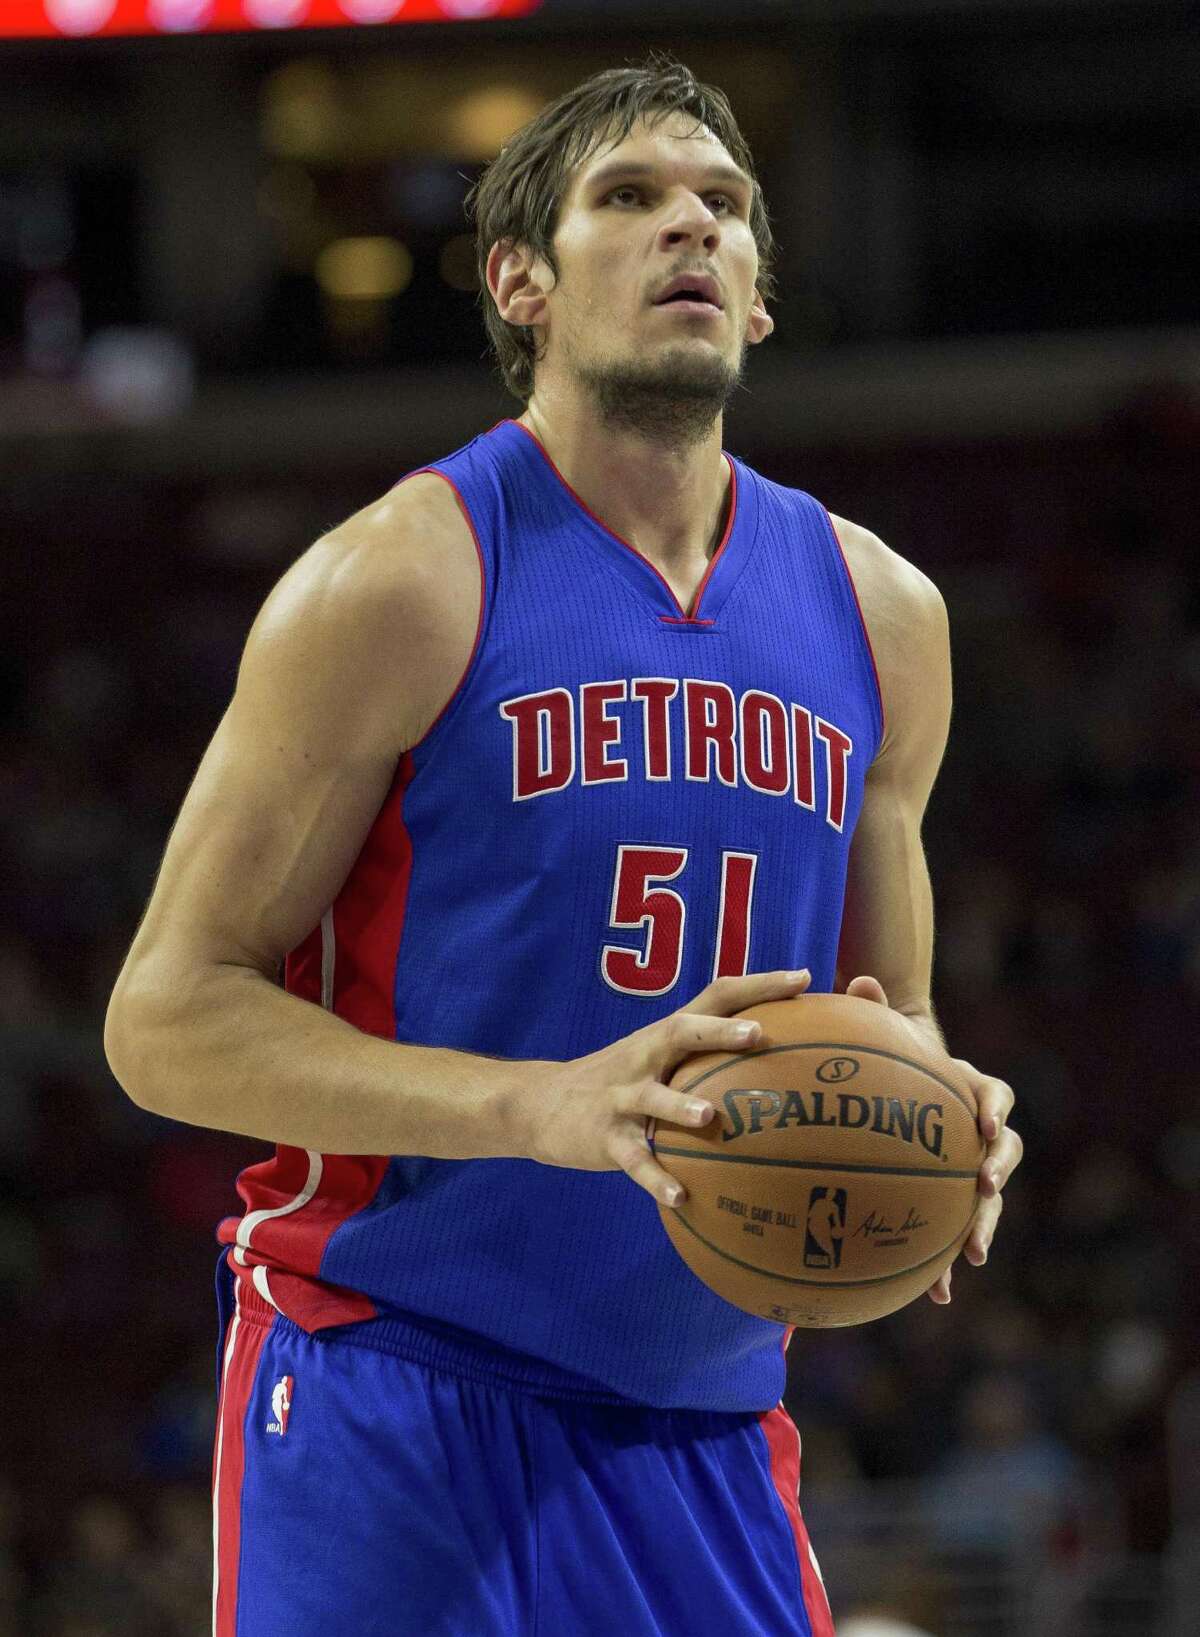 Detroit Pistons’ Boban Marjanovic takes a free-throw attempt during the first half of a preseason game against the 76ers on Oct. 15, 2016, in Philadelphia.